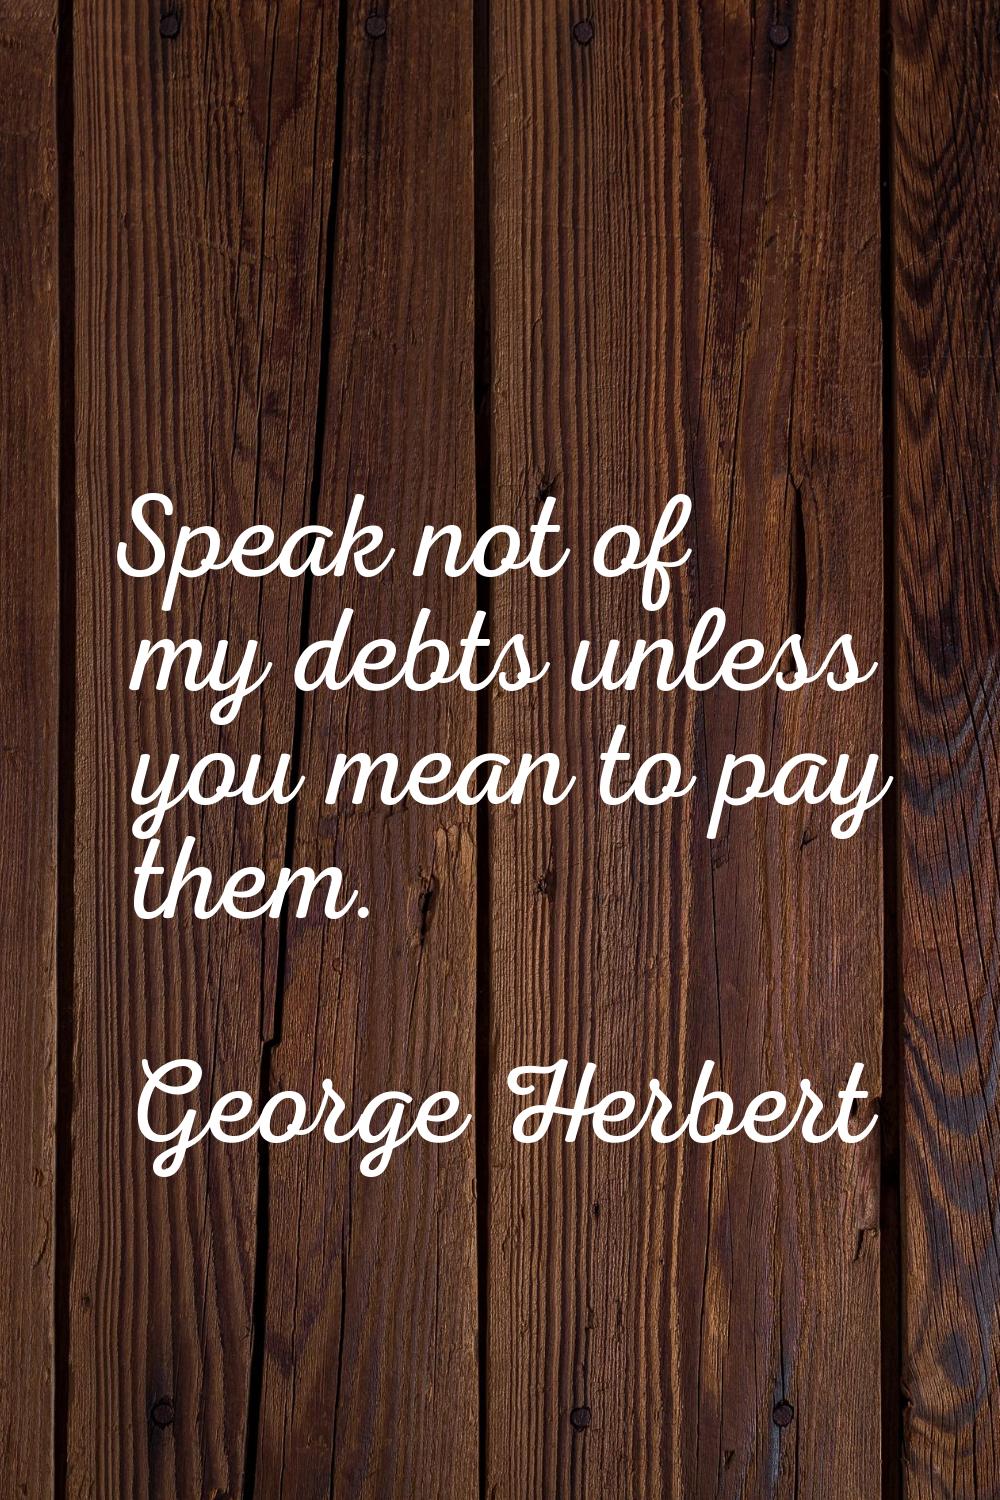 Speak not of my debts unless you mean to pay them.